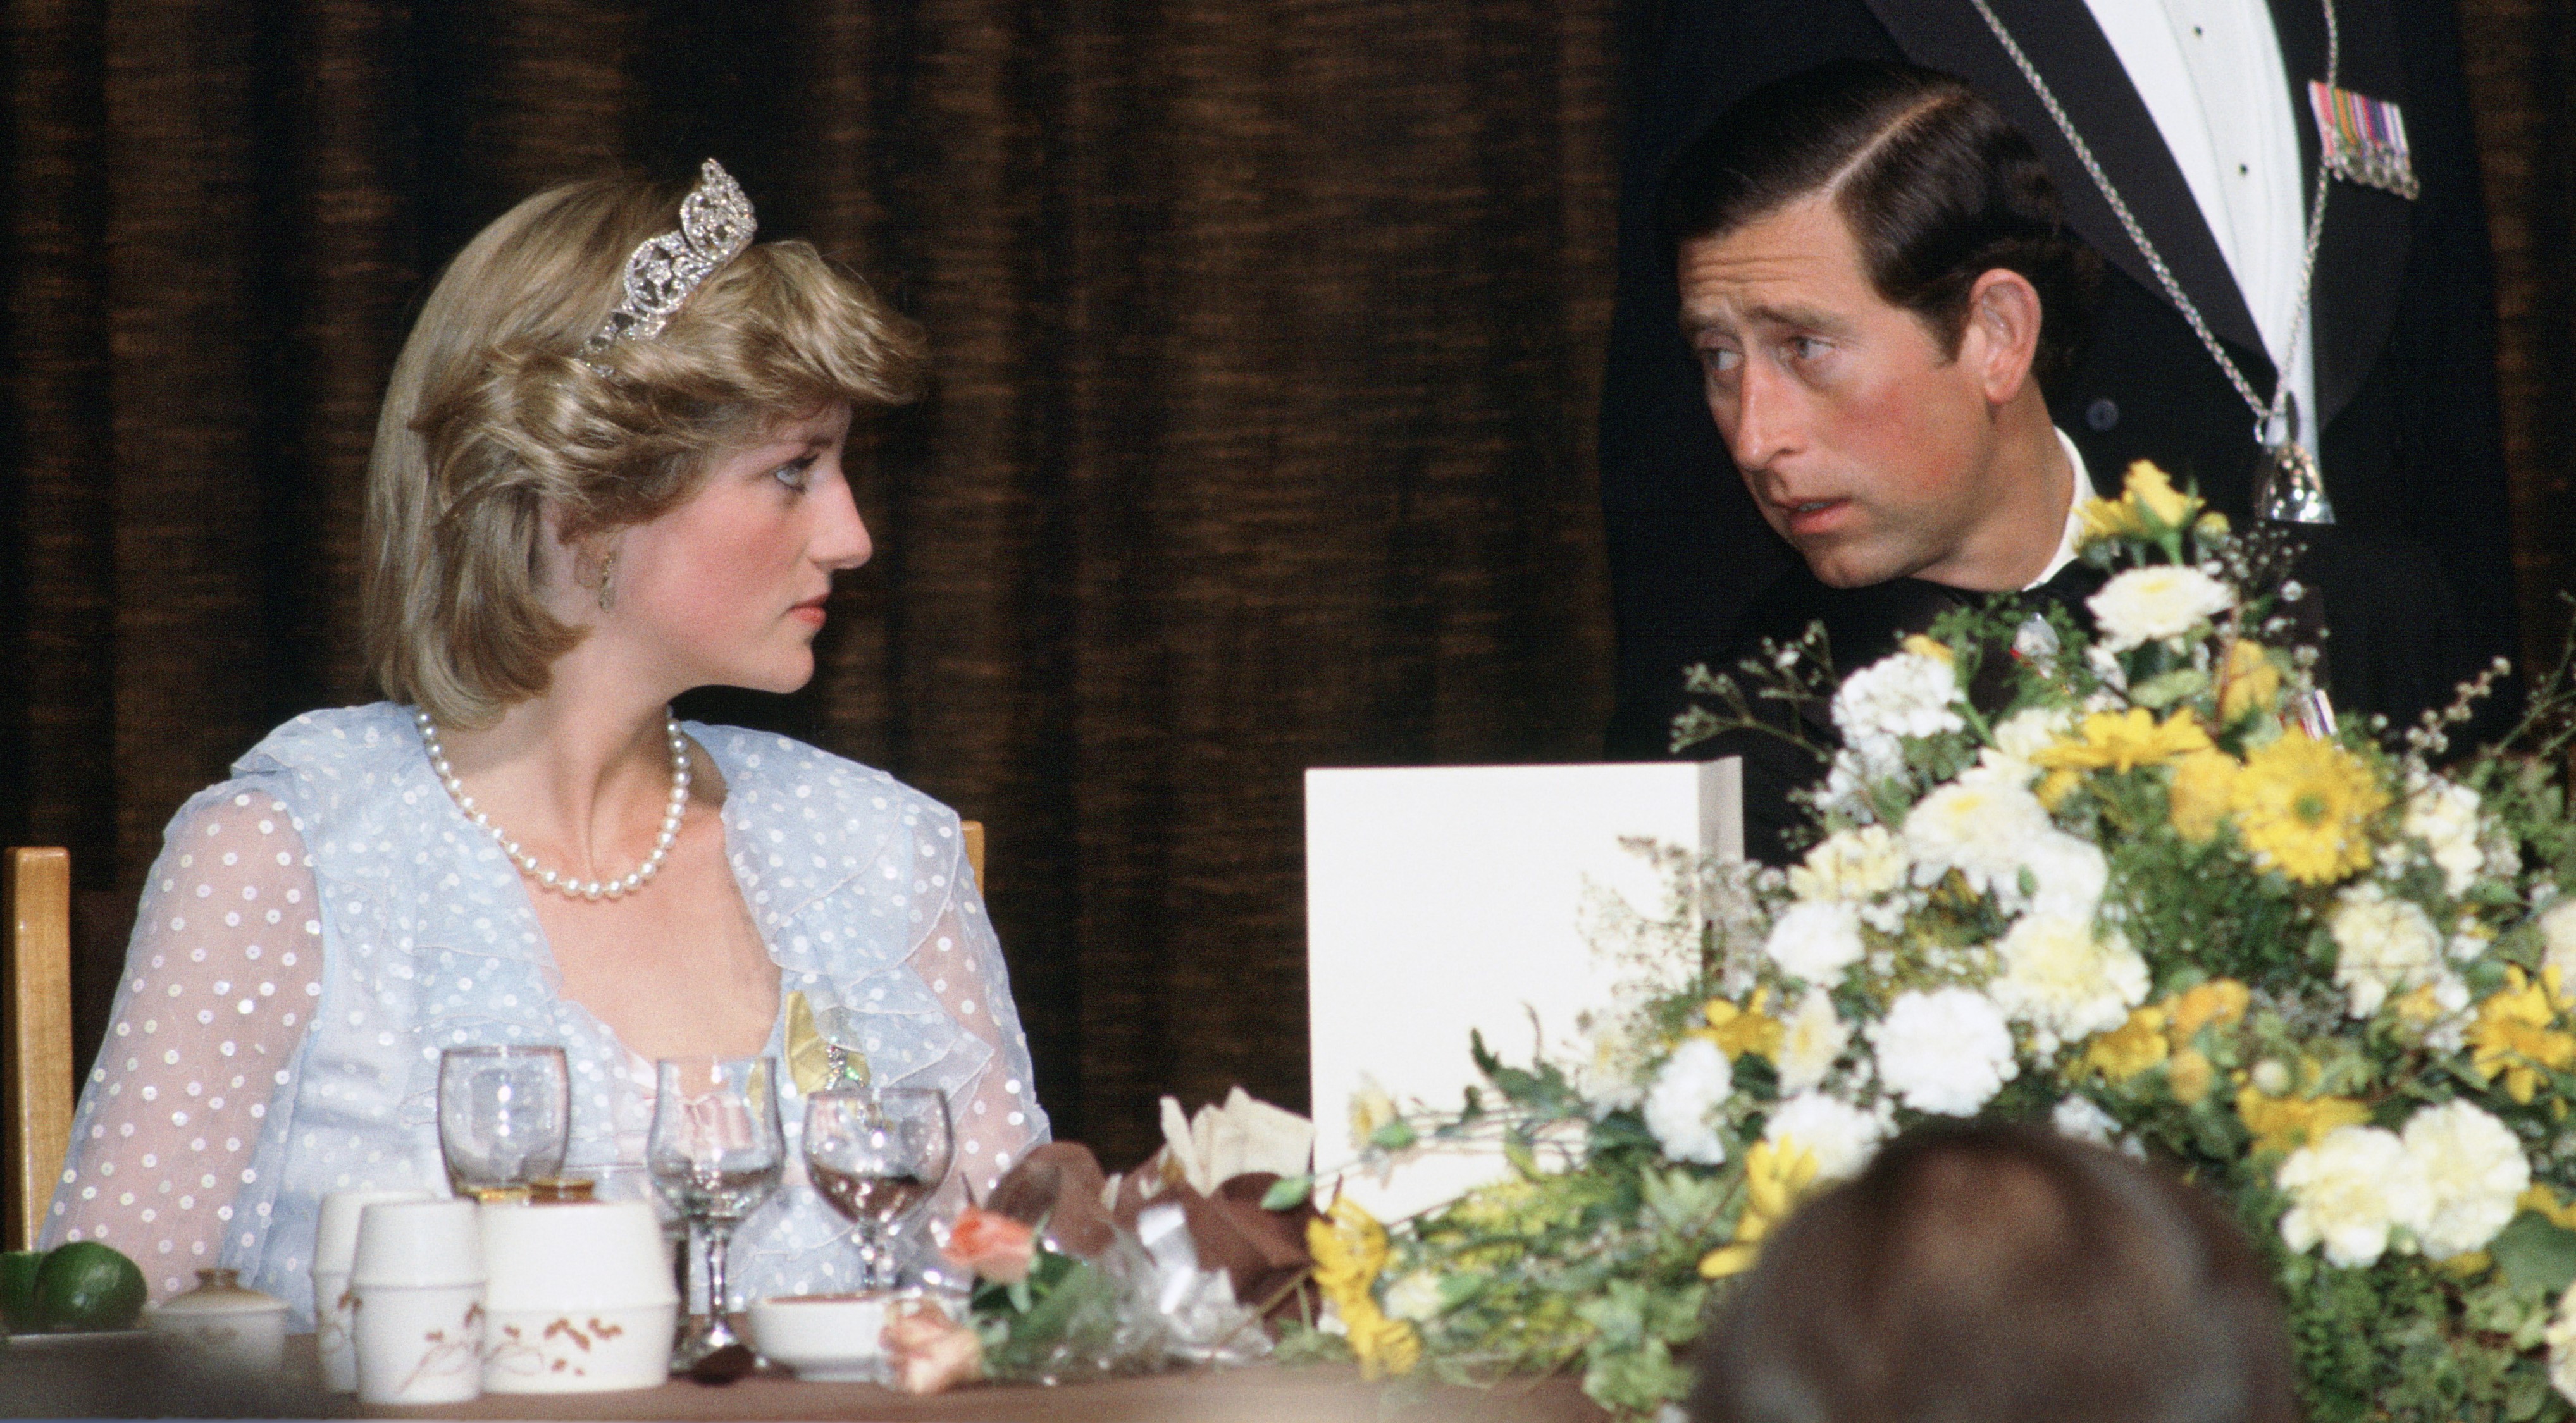 Princess Diana and Prince Charles, who may never be forgiven for how he treated his first wife, at a banquet dinner during their visit to New Zealand